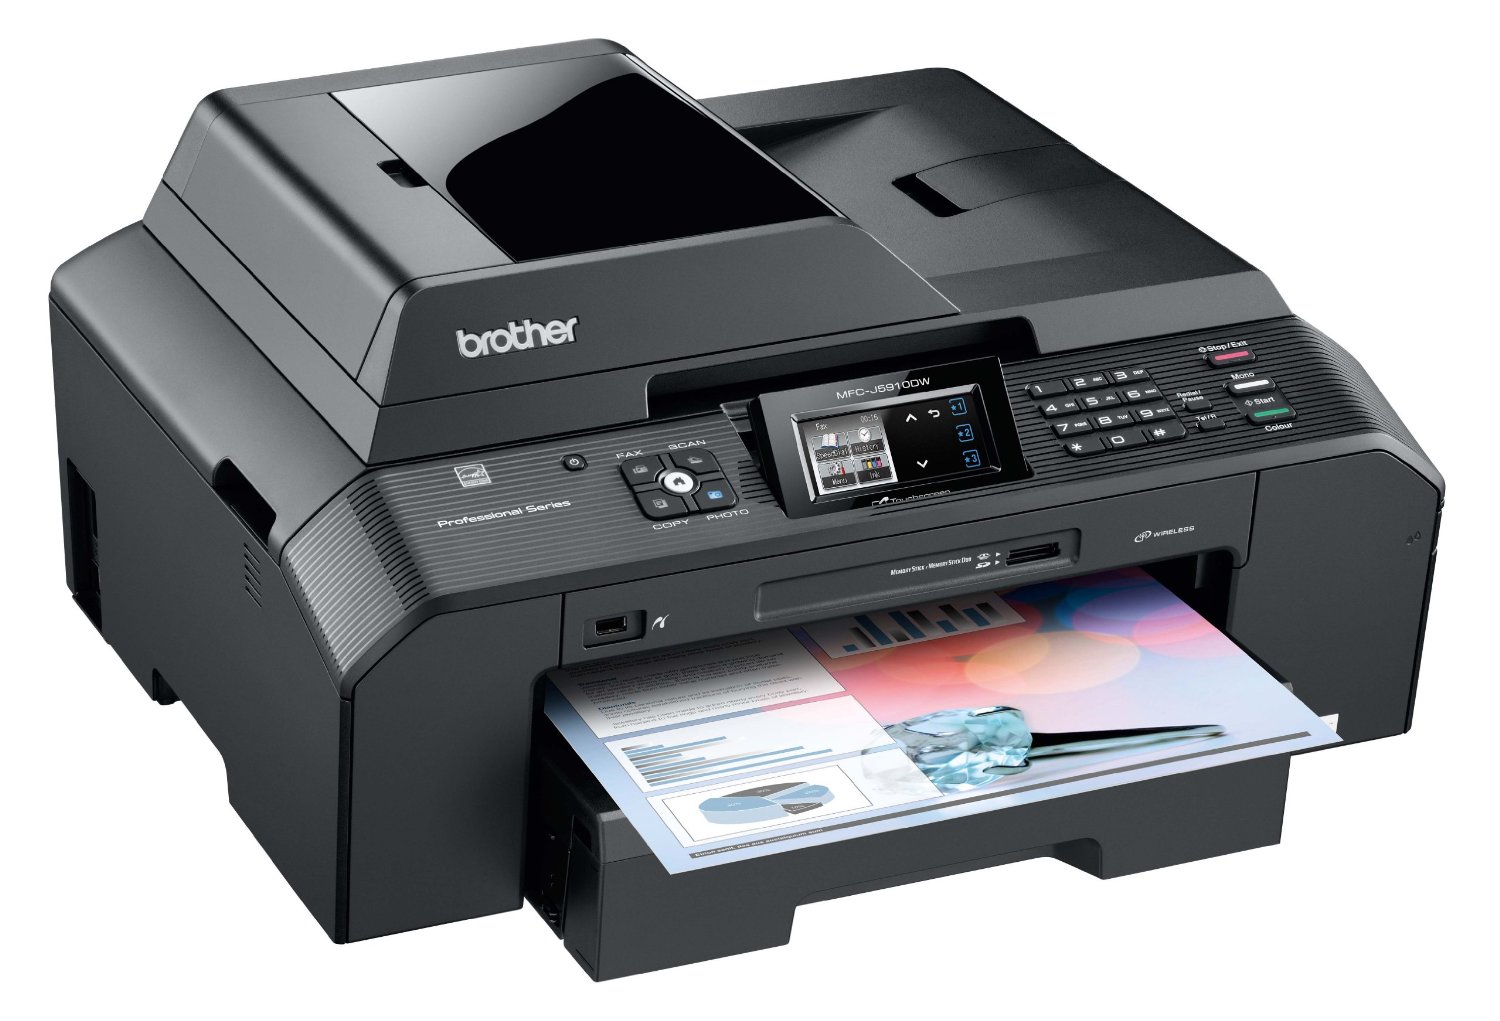 How to Get the Best Out Of Your Photo Printer - Inkjet Wholesale Blog